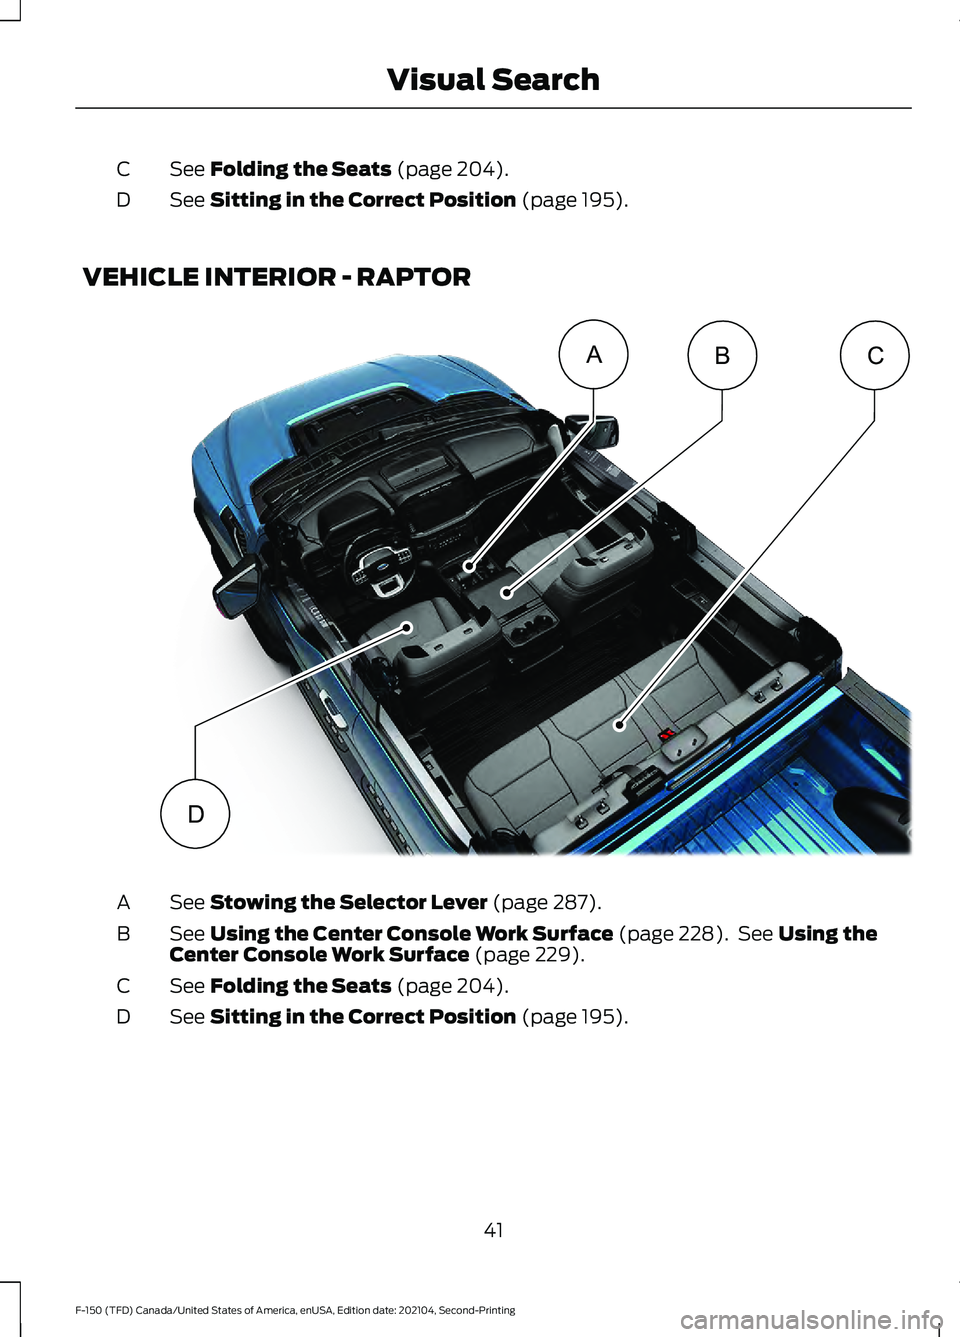 FORD F-150 2021  Owners Manual See Folding the Seats (page 204).
C
See 
Sitting in the Correct Position (page 195).
D
VEHICLE INTERIOR - RAPTOR See 
Stowing the Selector Lever (page 287).
A
See 
Using the Center Console Work Surfac